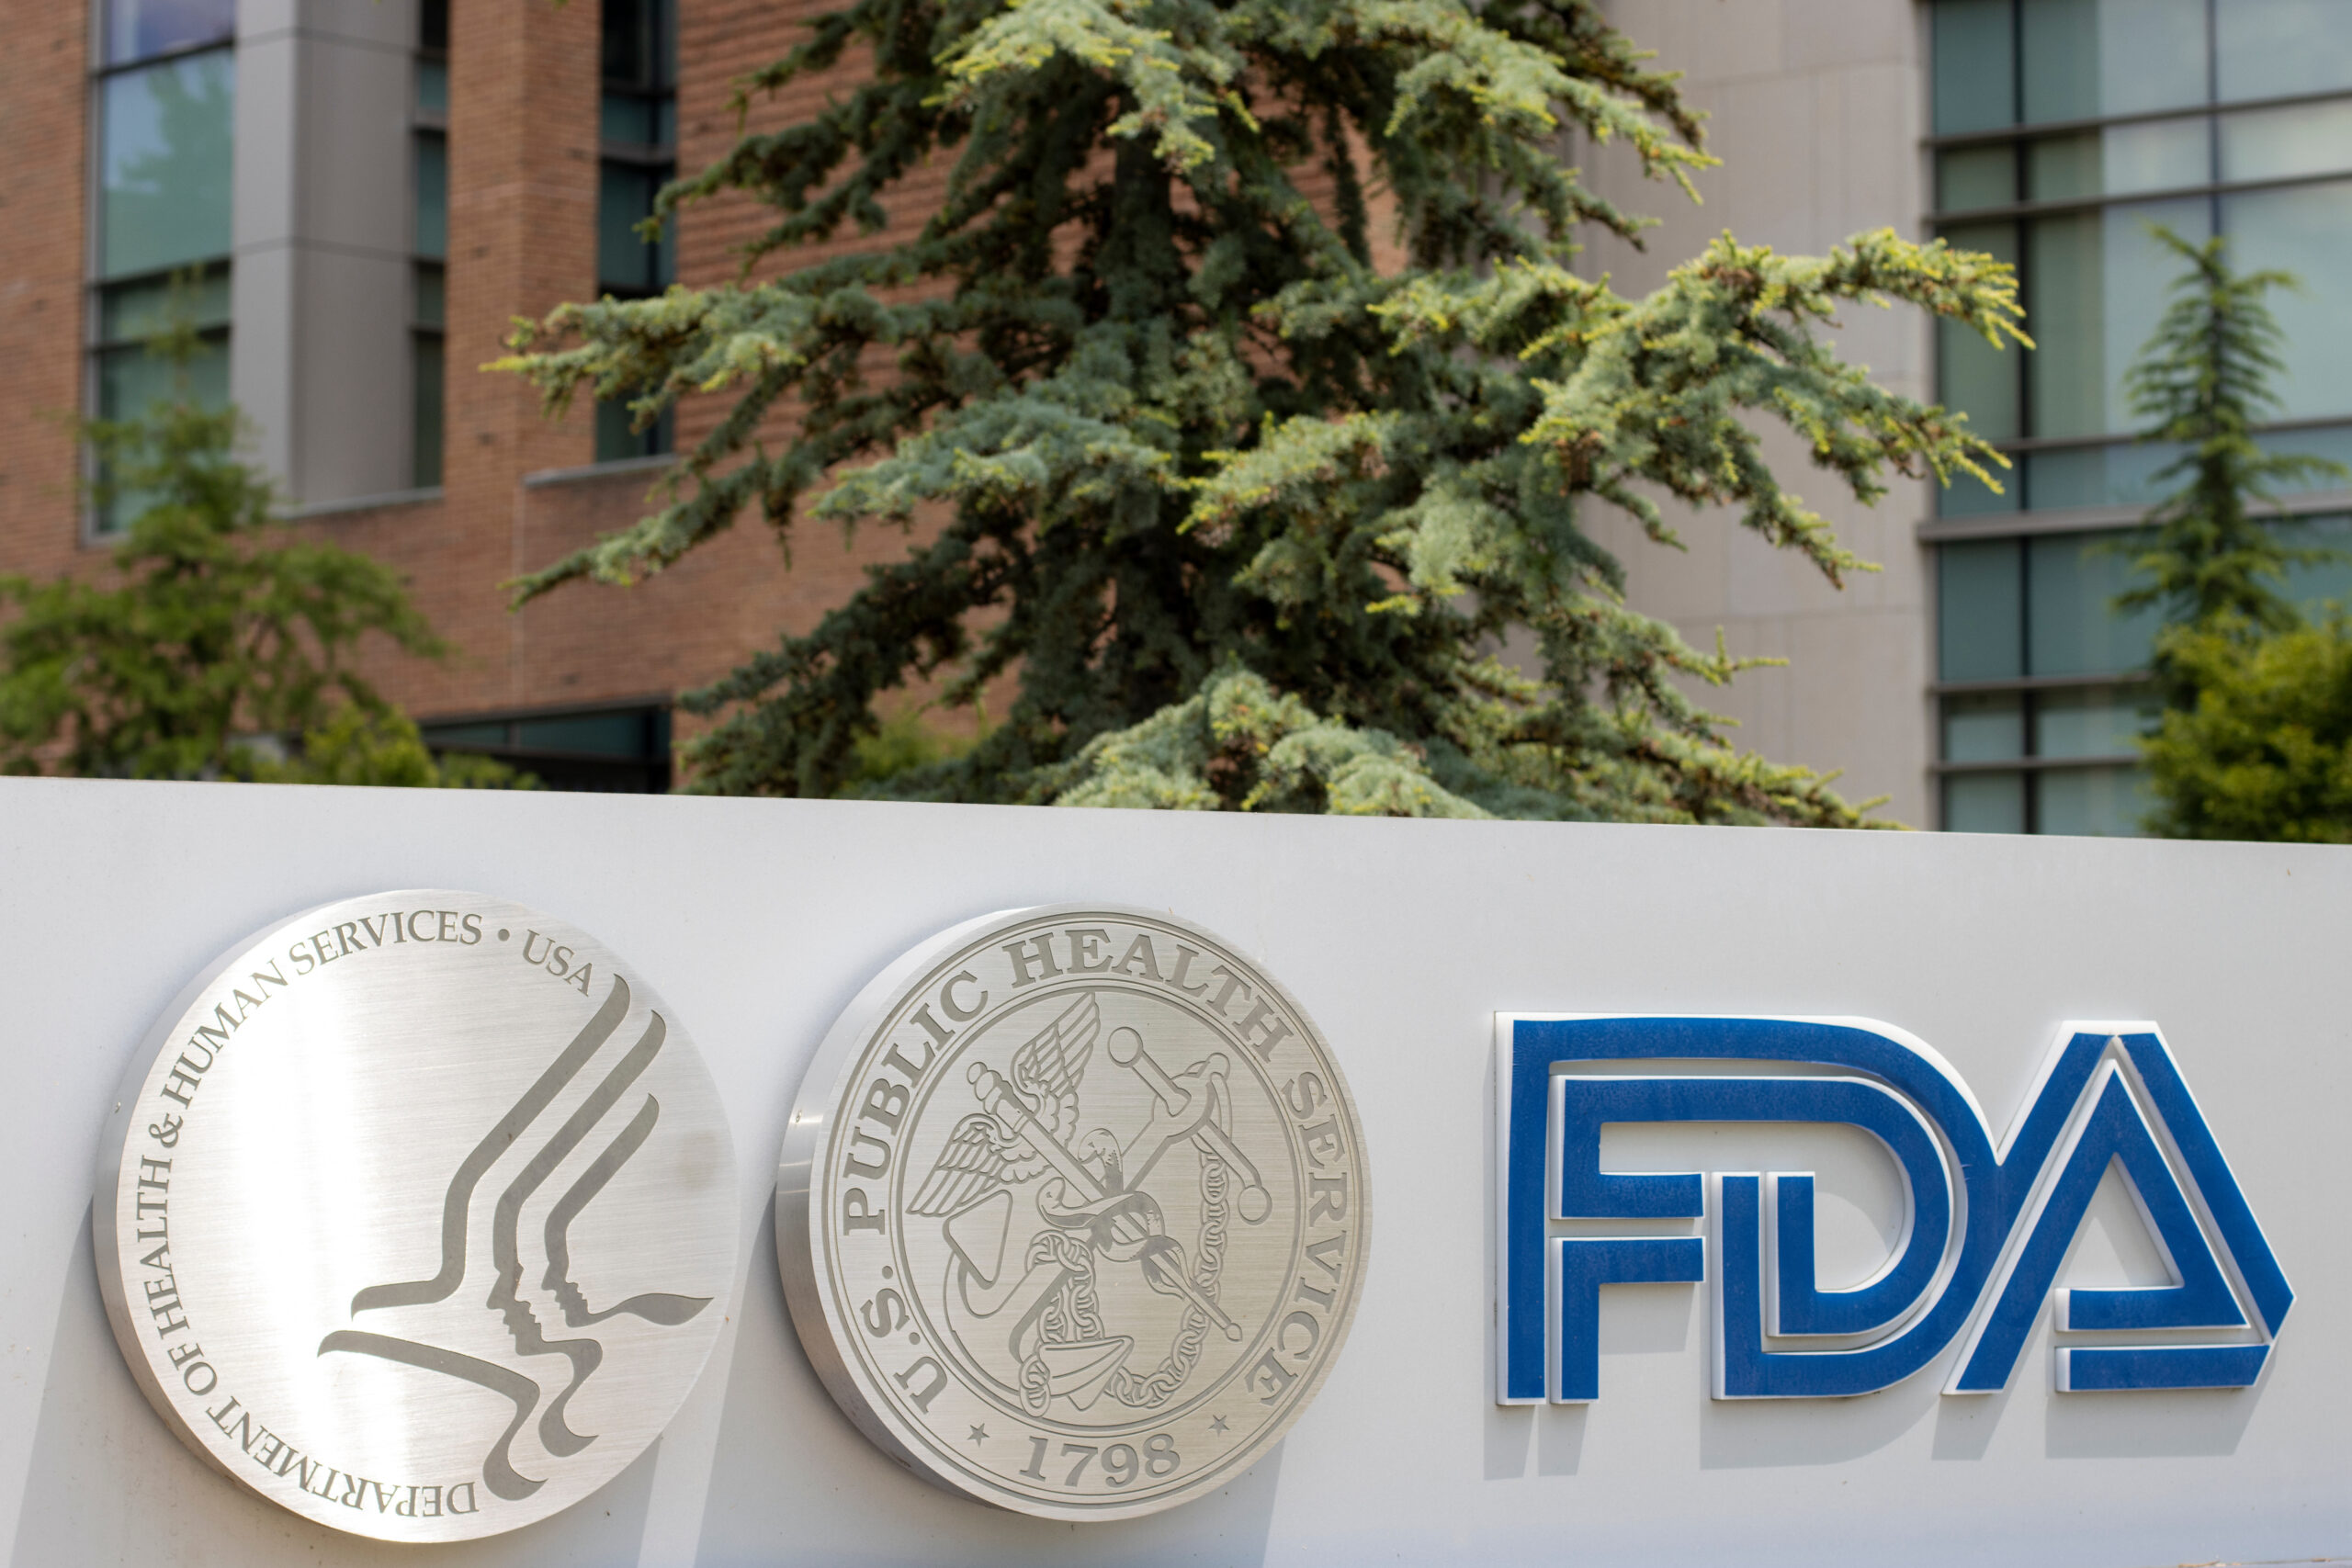 A photograph of FDA signage outside of the agency's headquarters.